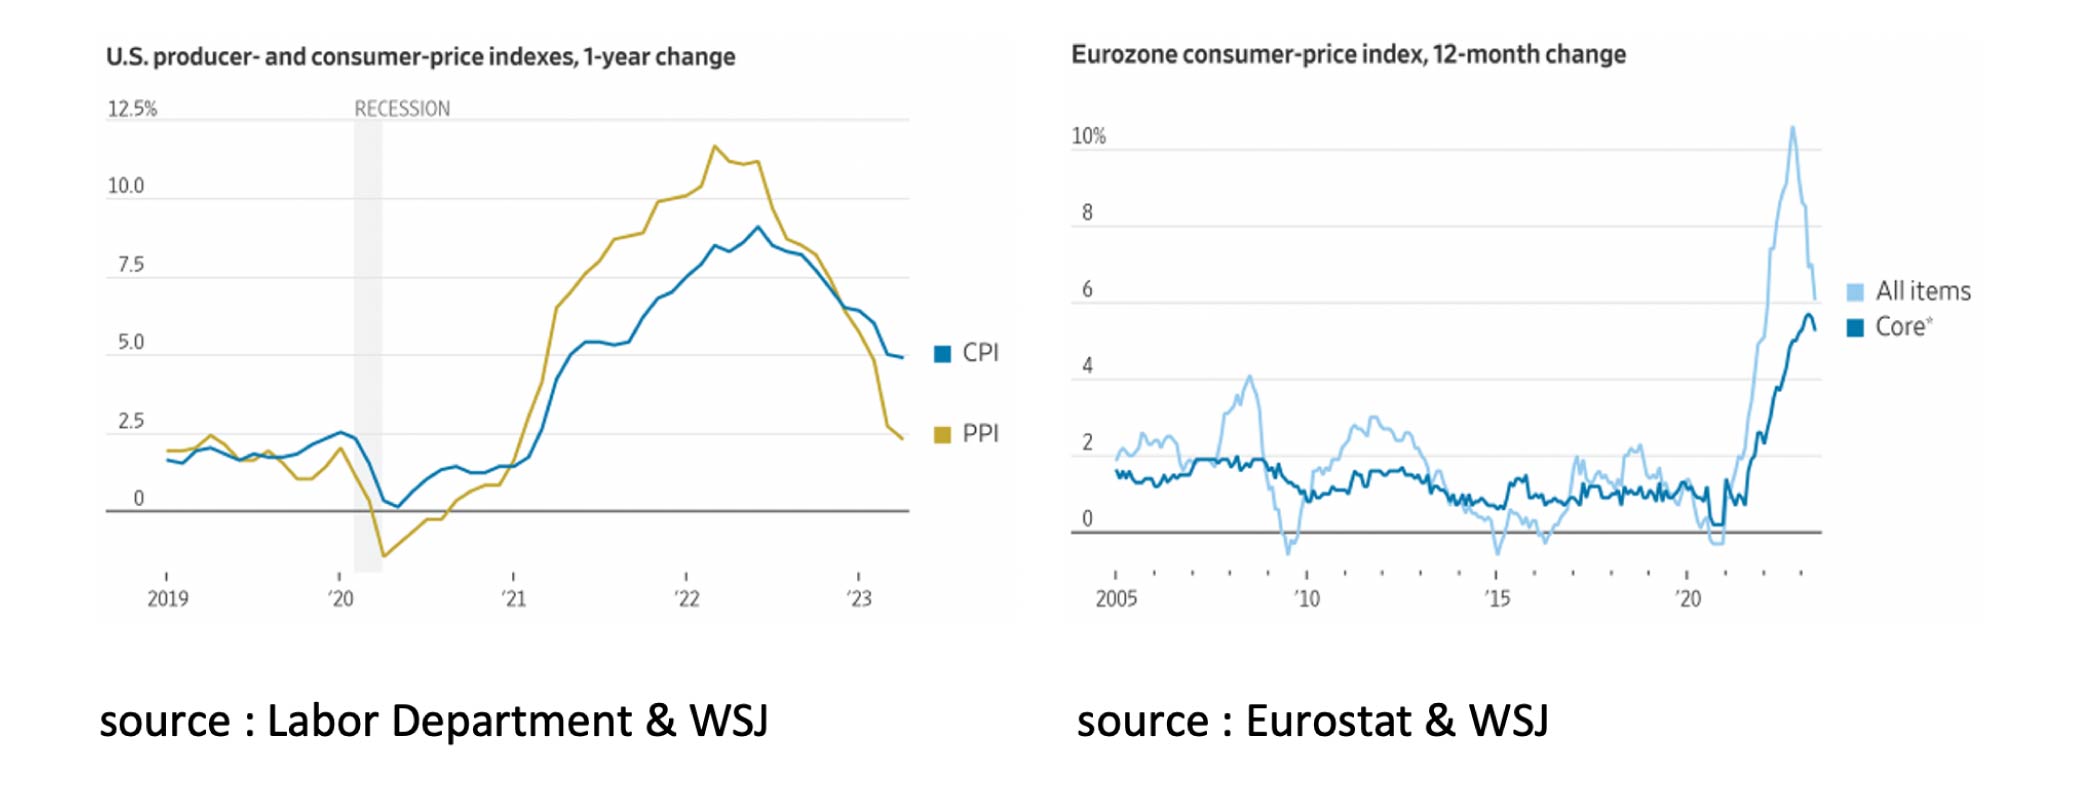 EUS producer and consumer price indexes 1 year change - June '23